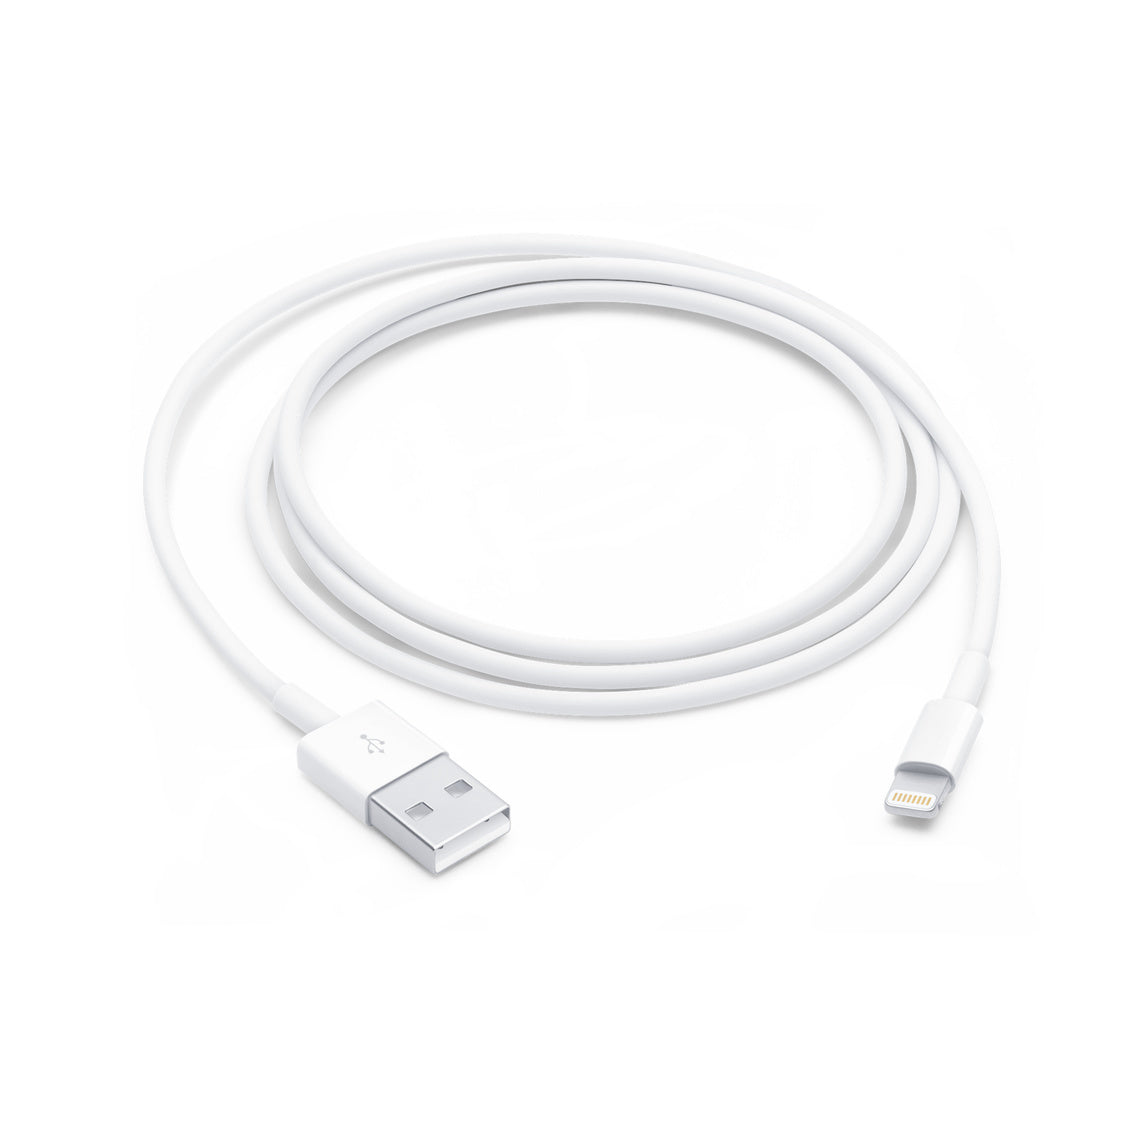 Apple original charger cable , lighting to USB cable 1m de largo